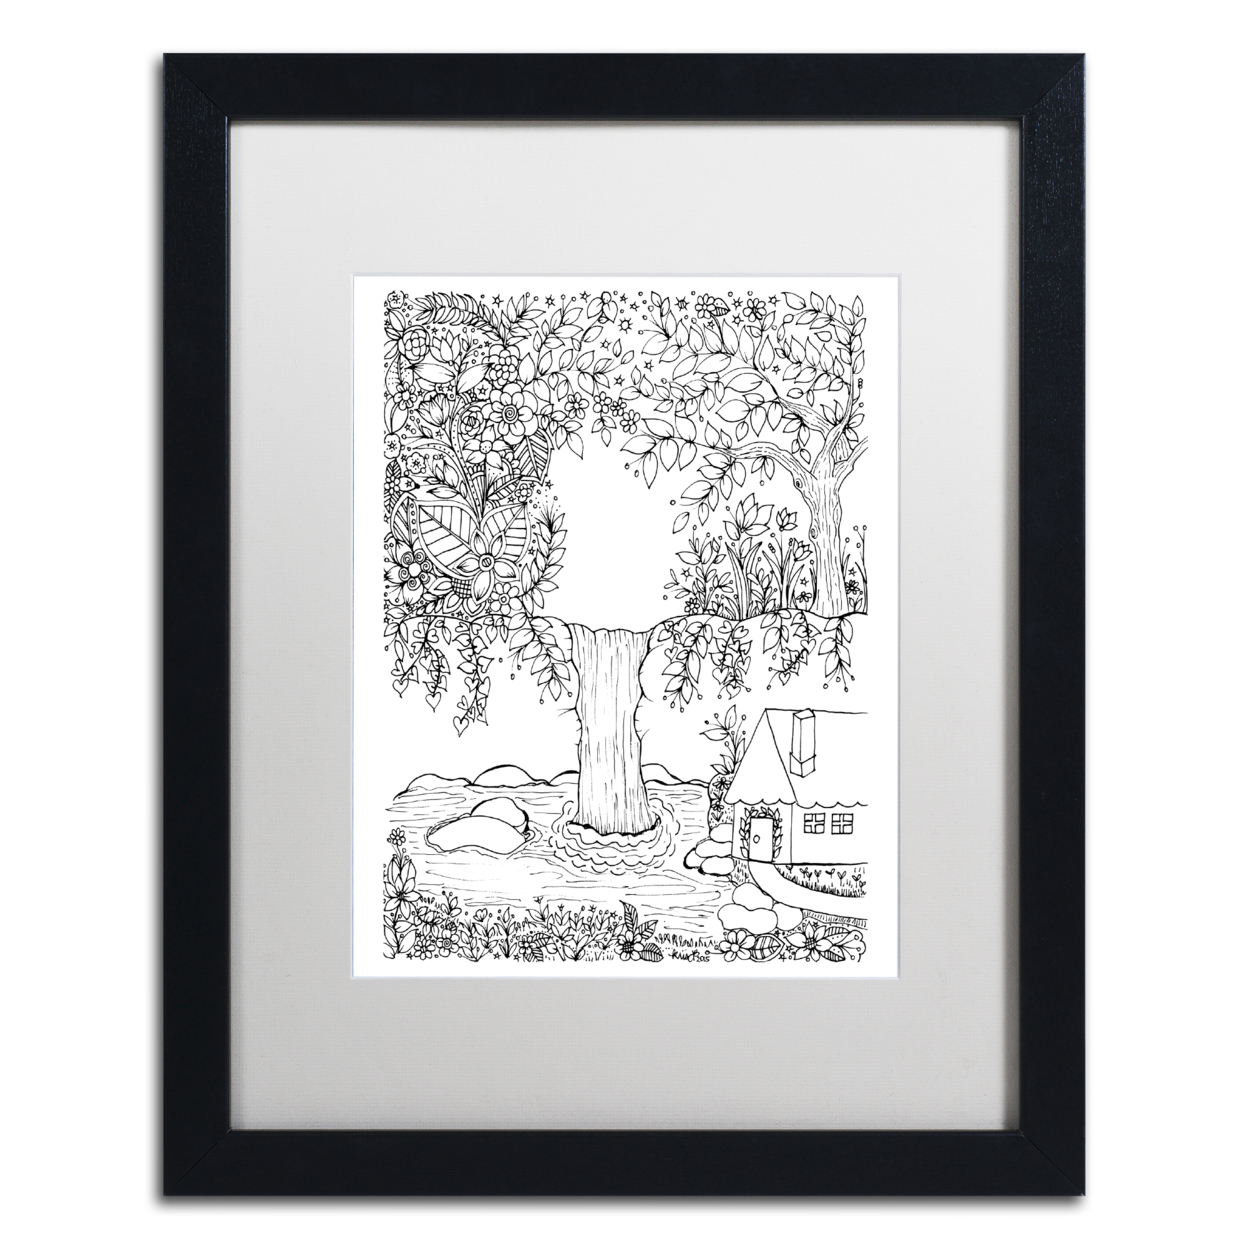 KCDoodleArt 'Waterfall Doodle' Black Wooden Framed Art 18 X 22 Inches